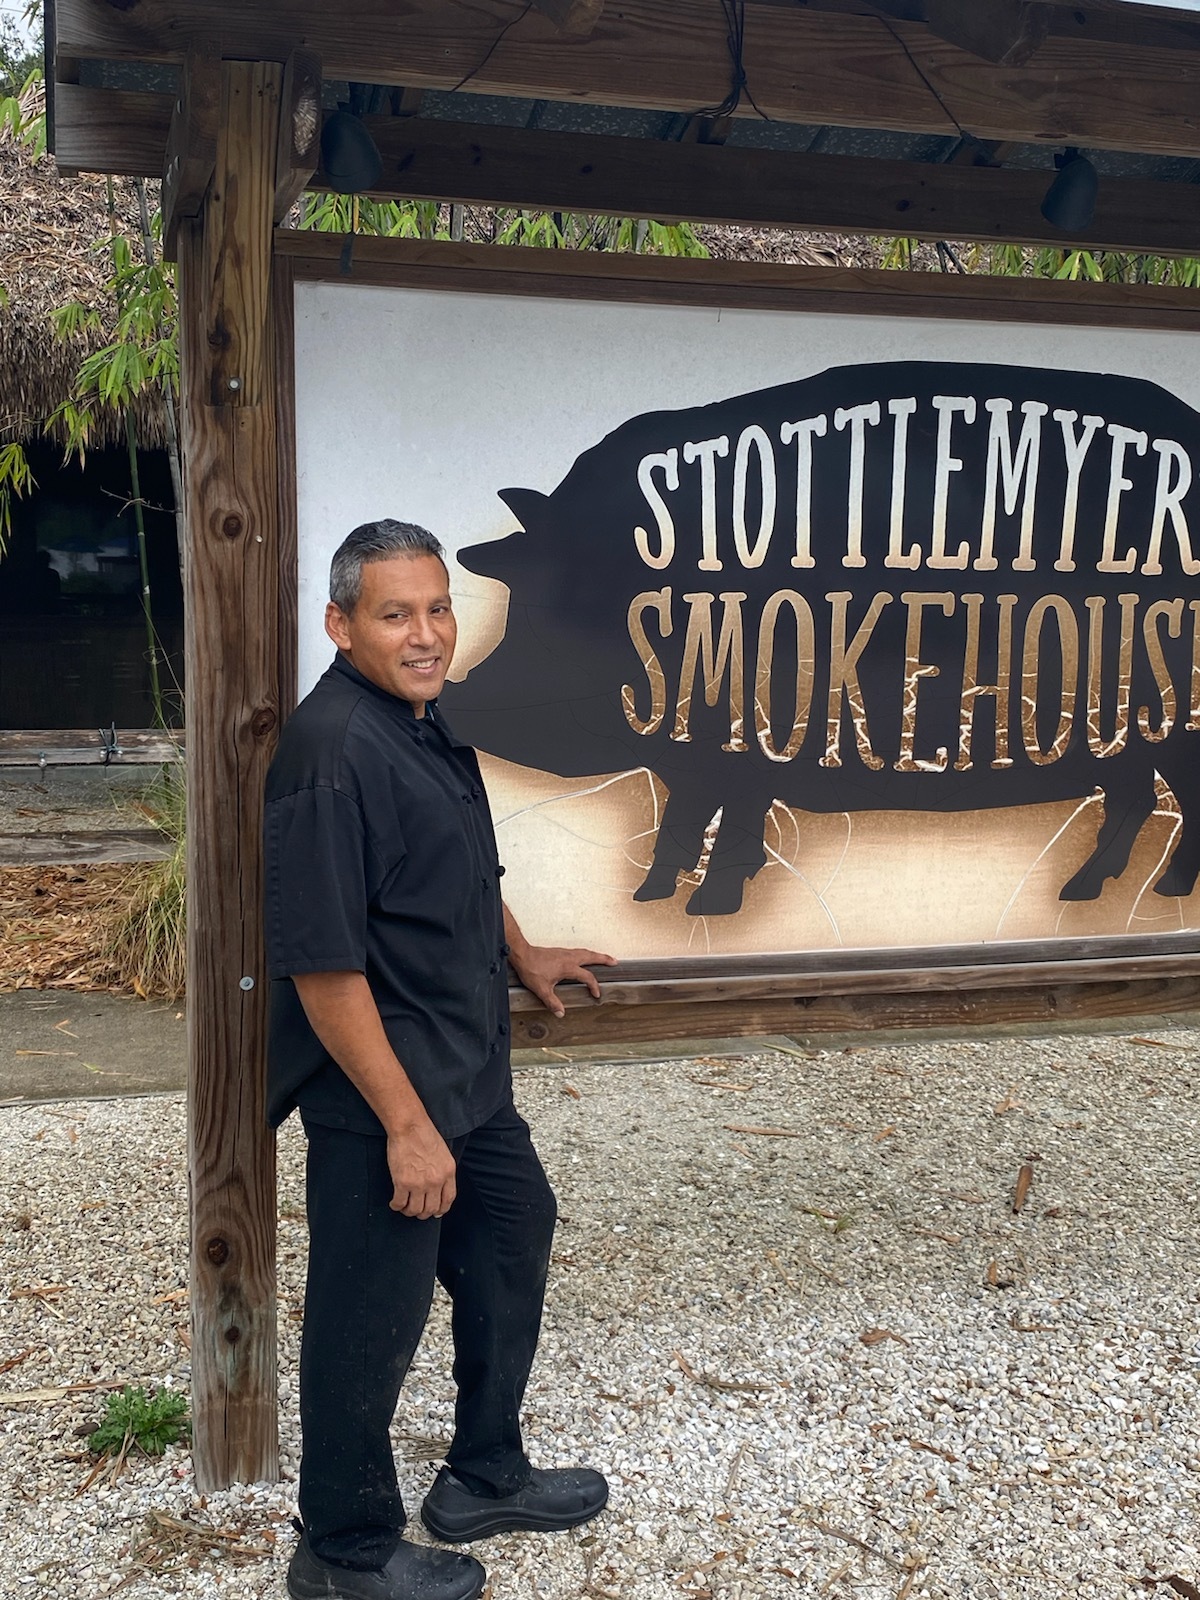 Chef Felix Morales with Stottlemyer's